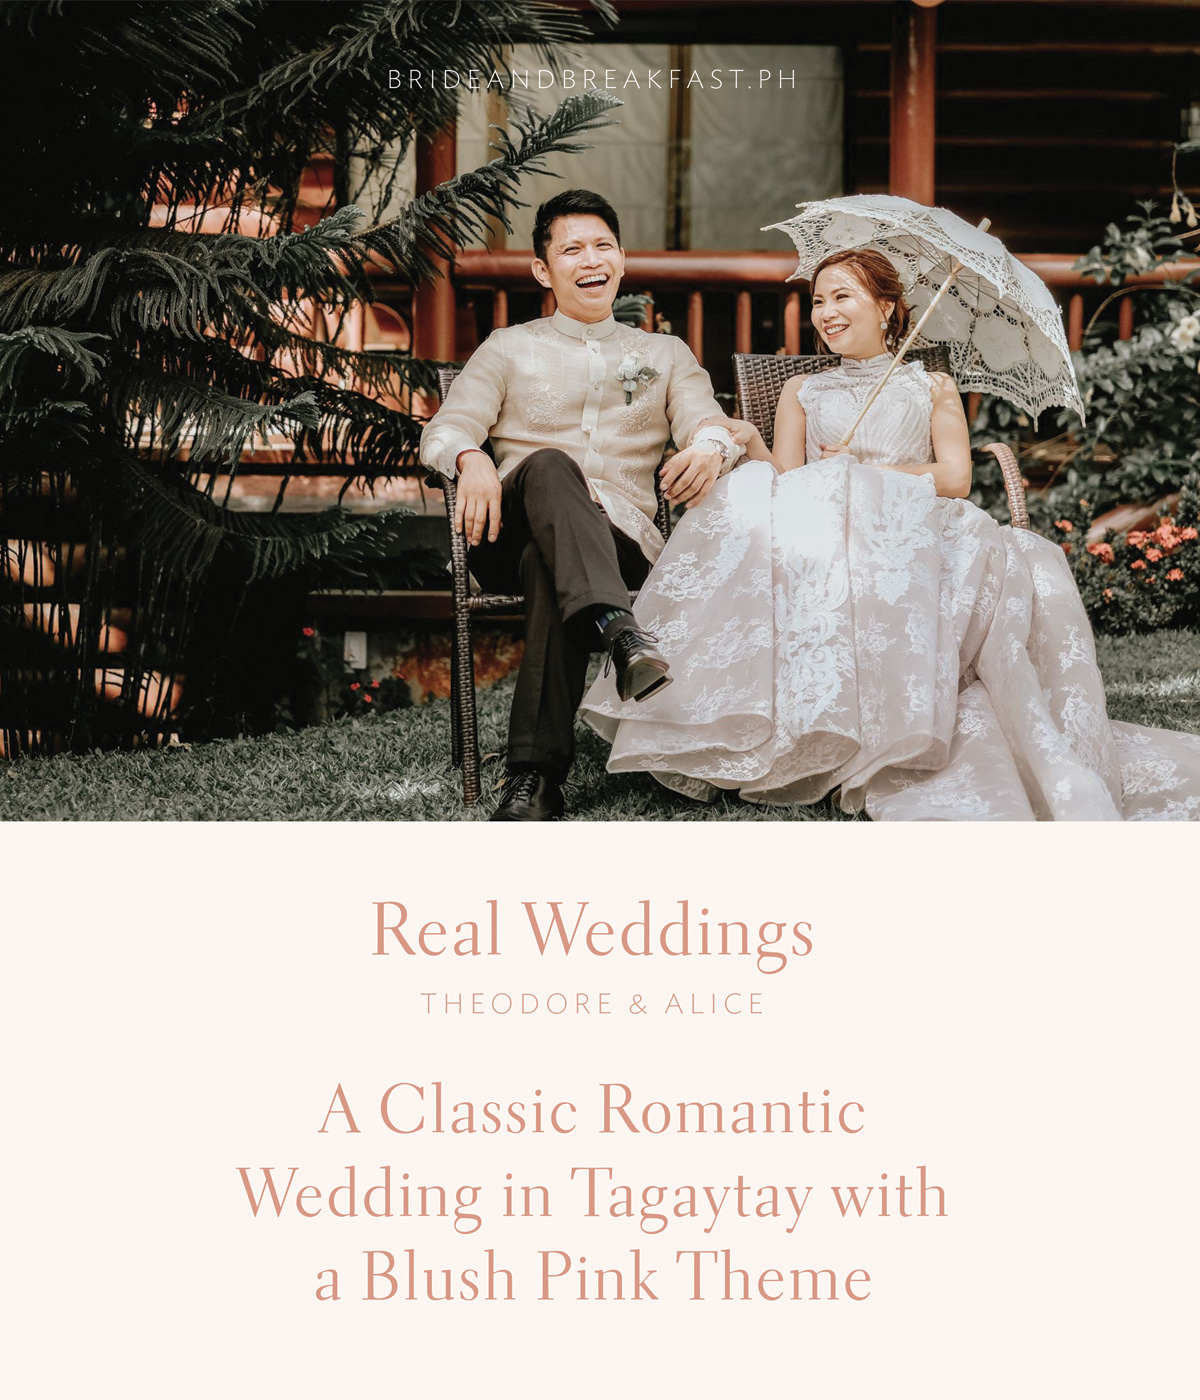 A Classic Romantic Wedding in Tagaytay with a Blush Pink Theme